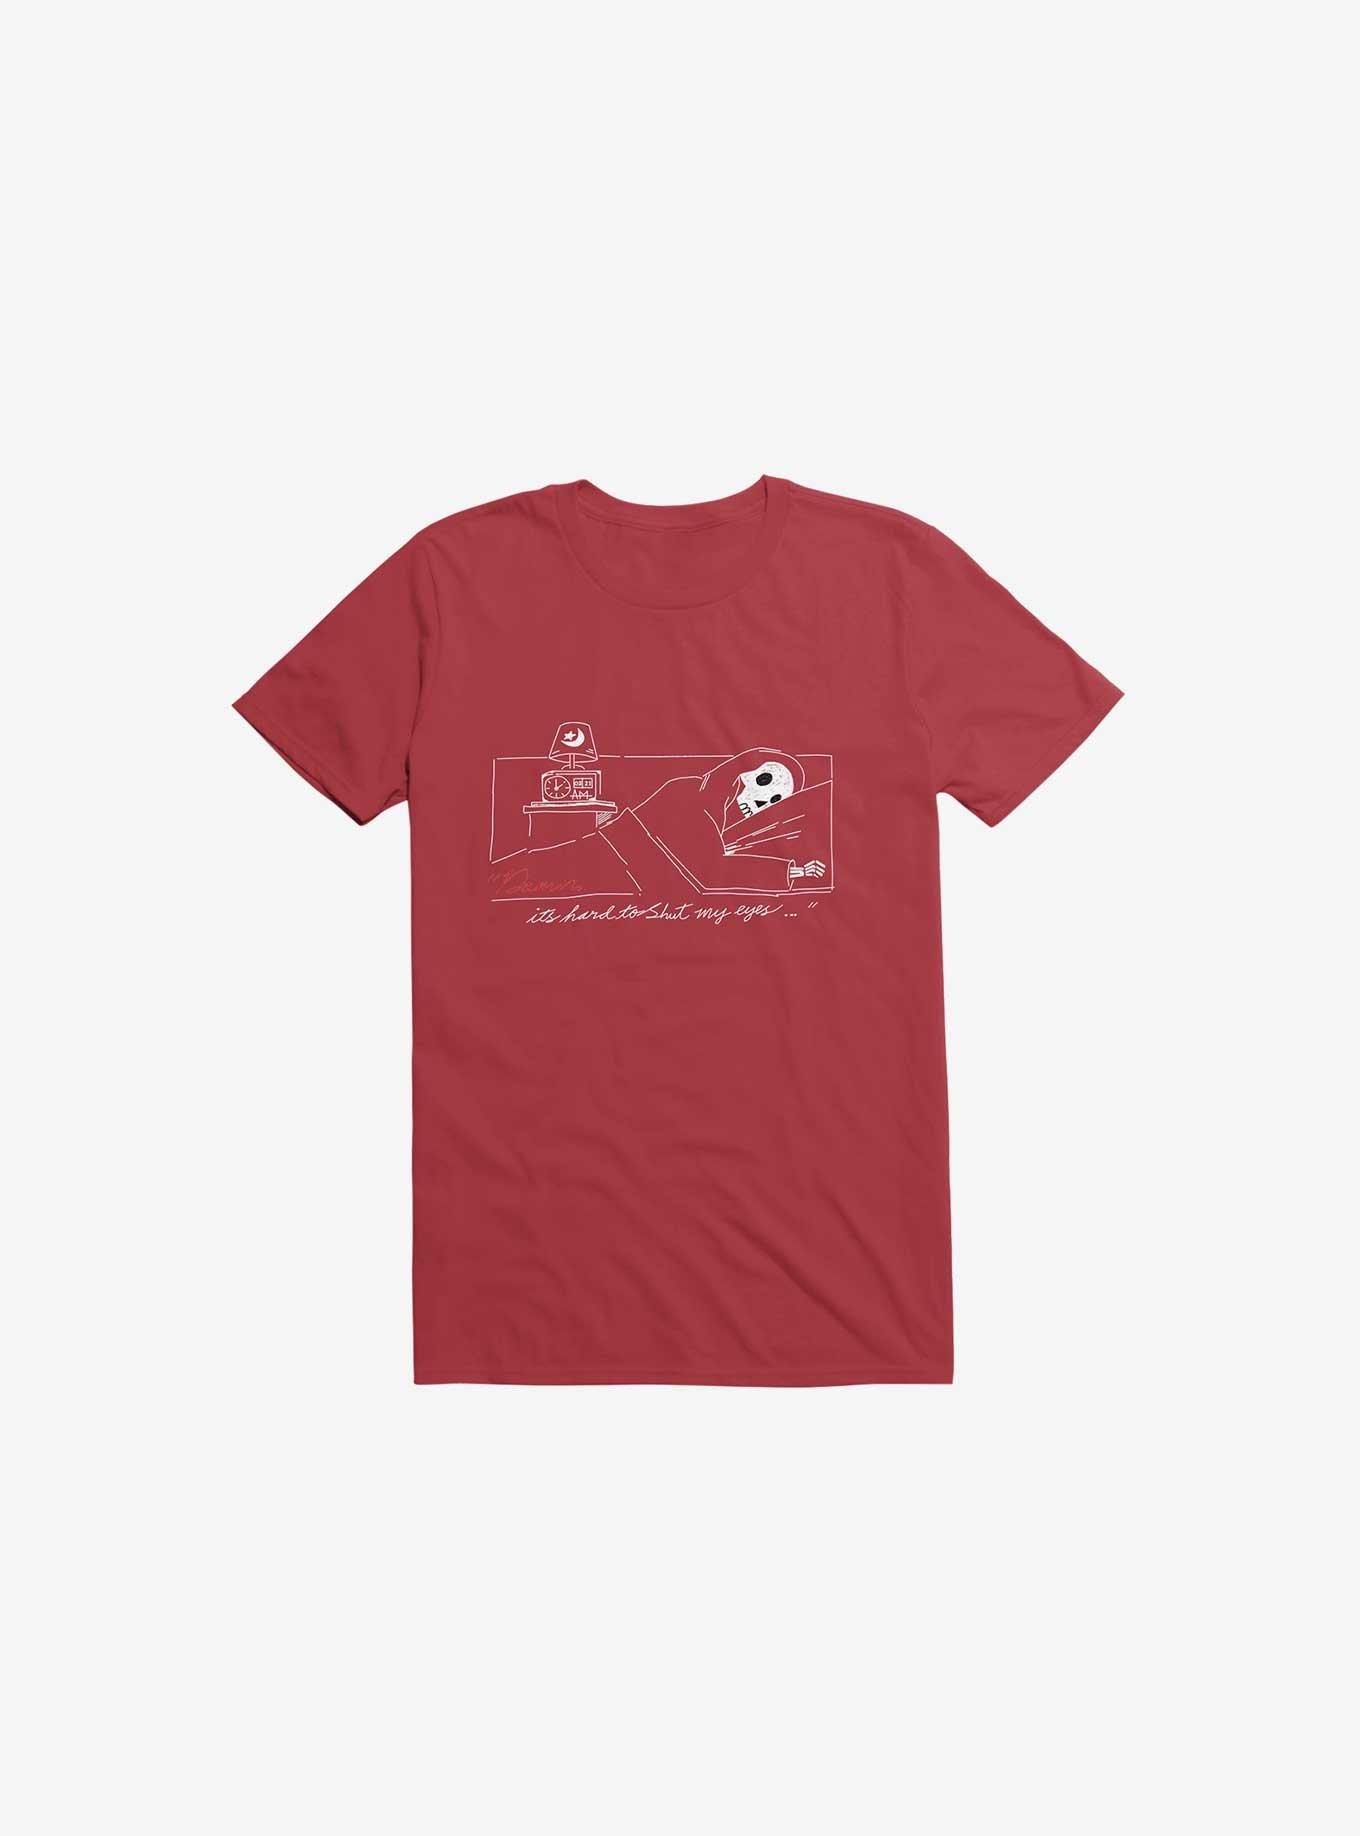 Damn, Sleepy Time Is Out T-Shirt, RED, hi-res